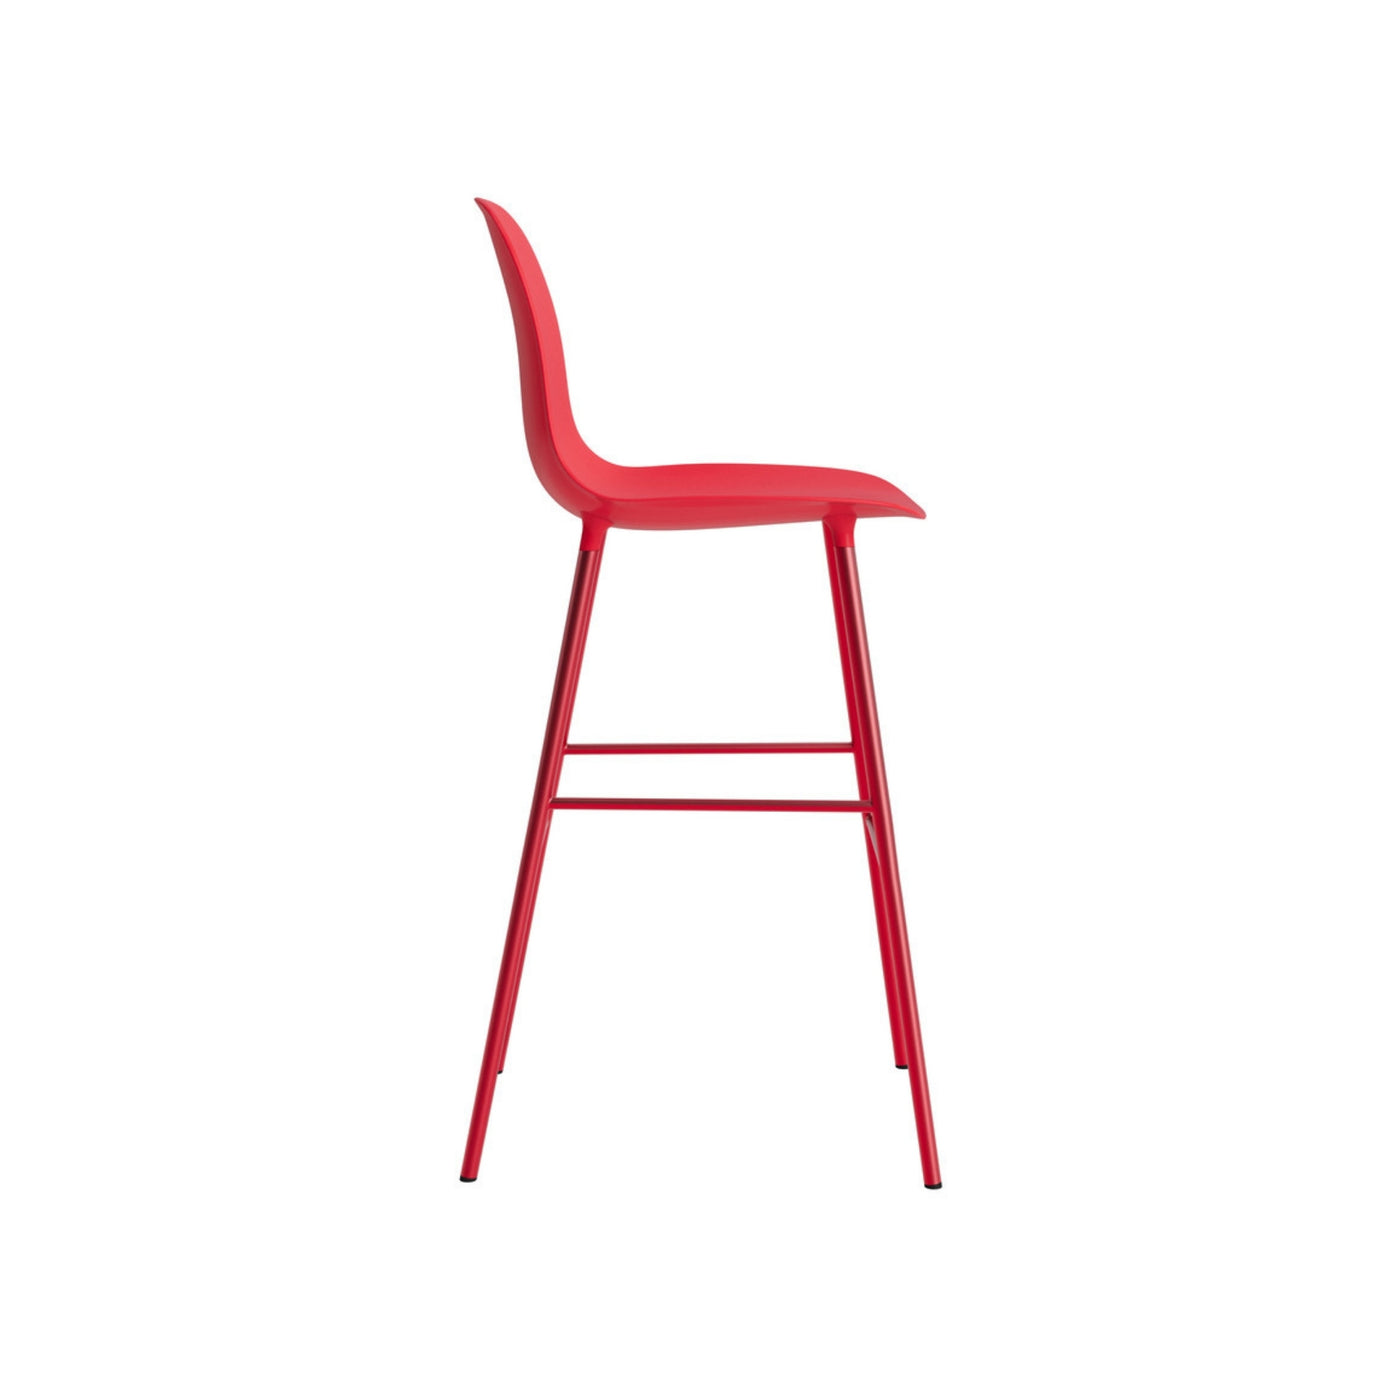 Normann Copenhagen Form Bar Chair Steel at someday designs. #colour_bright-red